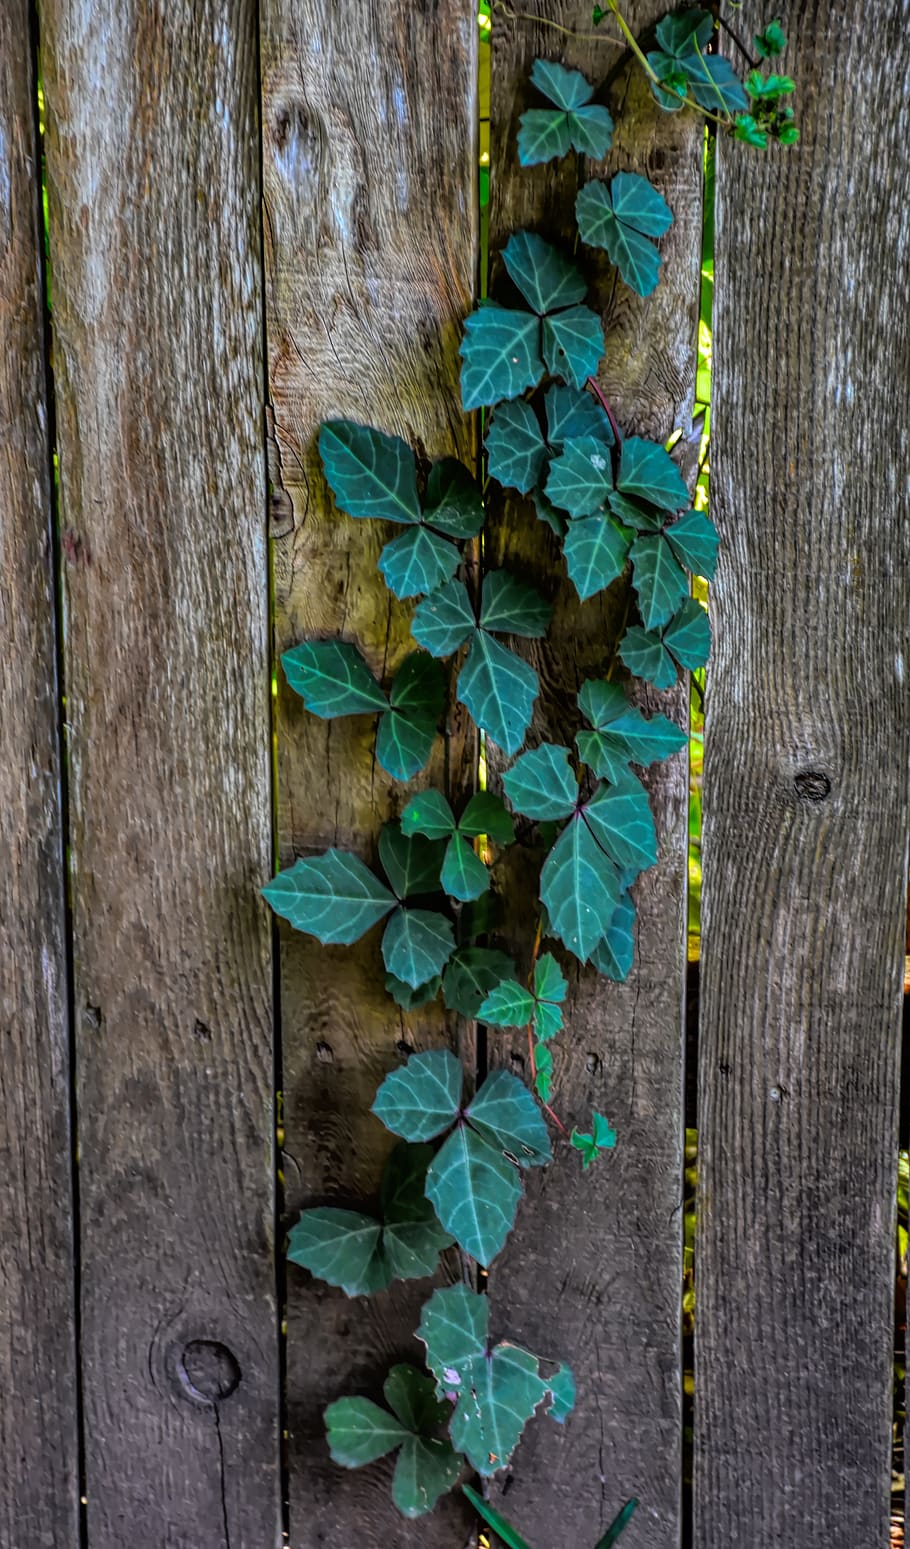 vine, fence, leaves, nature, green, wood, wallpaper, background, outdoor, rustic